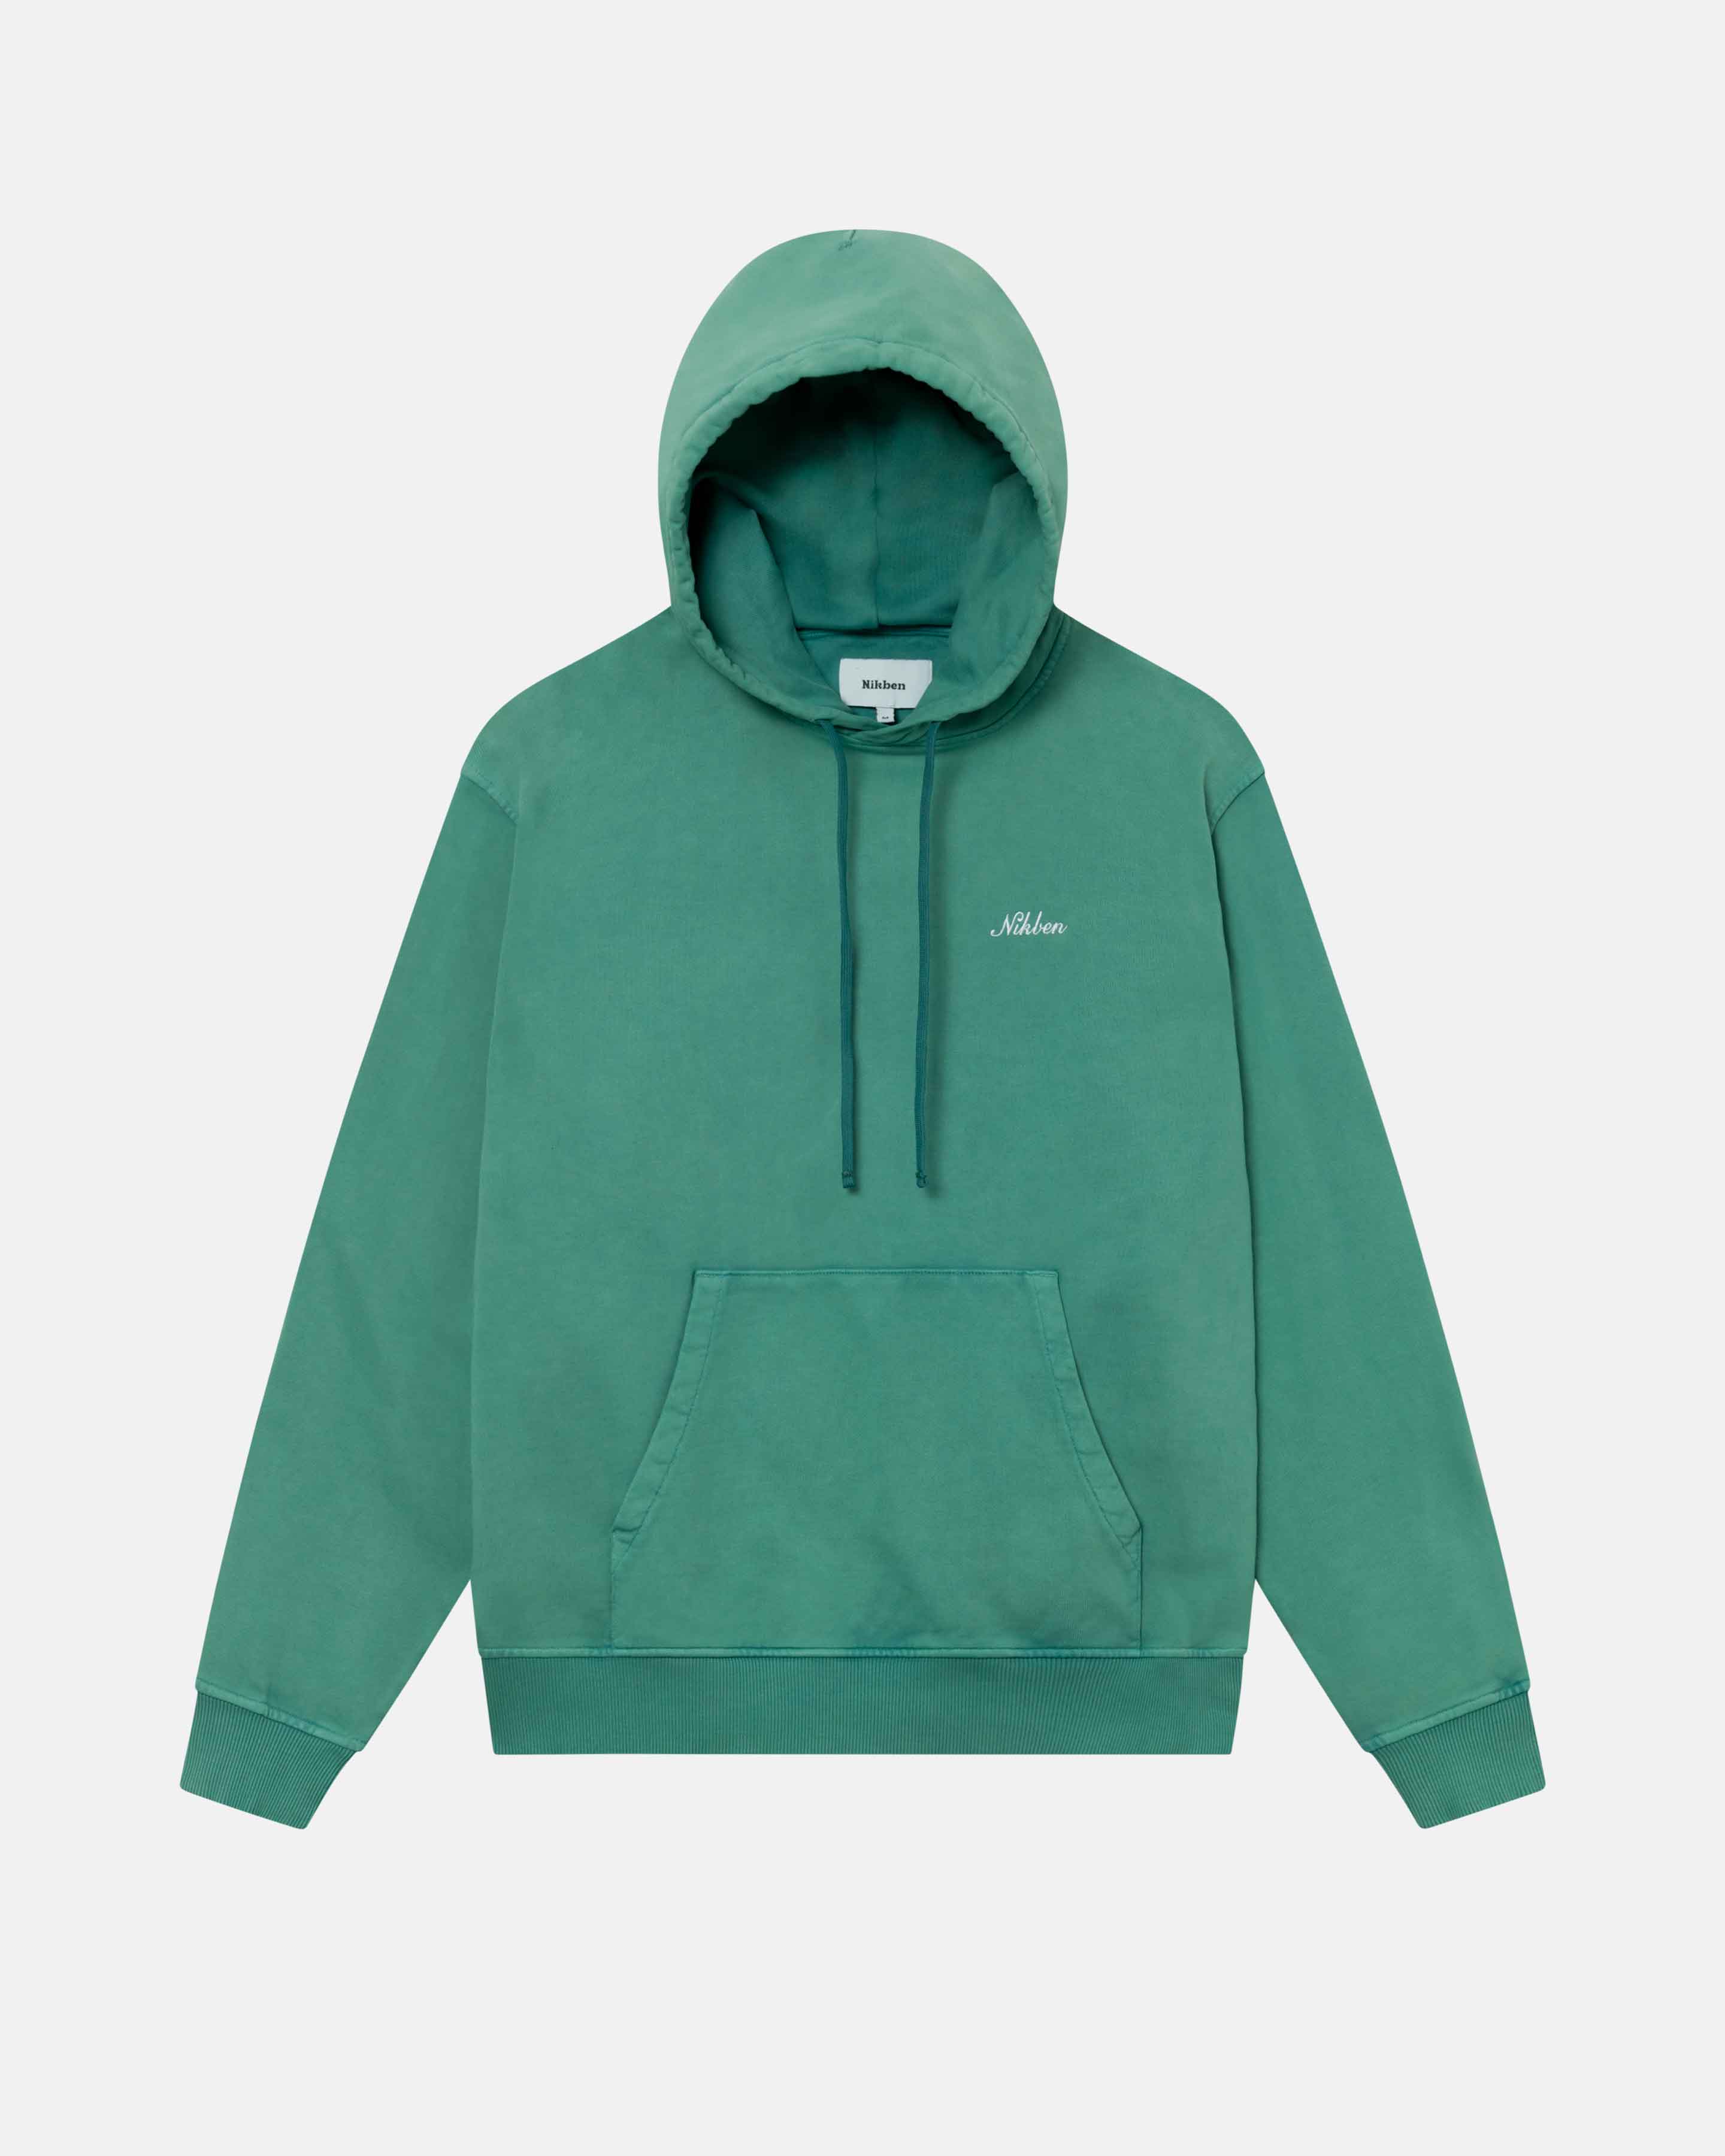 A green hoodie with an embroidered Nikben script logo